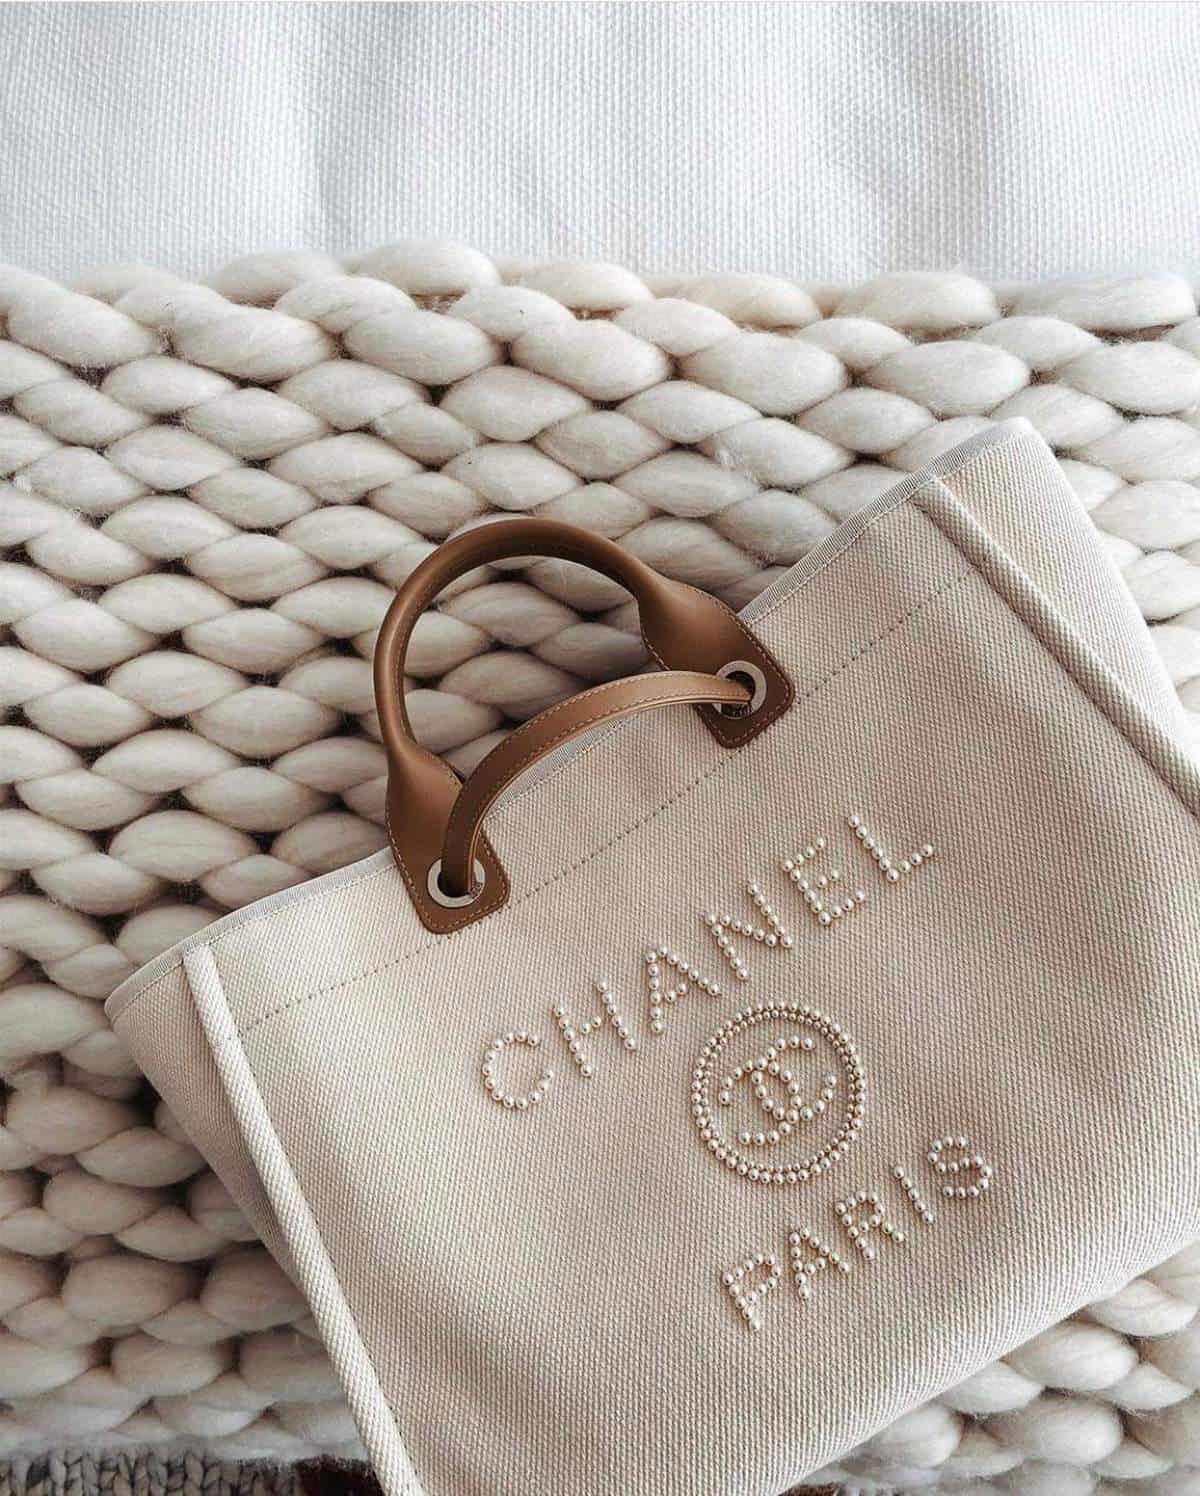 How To Spot A Fake Chanel Deauville Bag - Legit Check By Ch